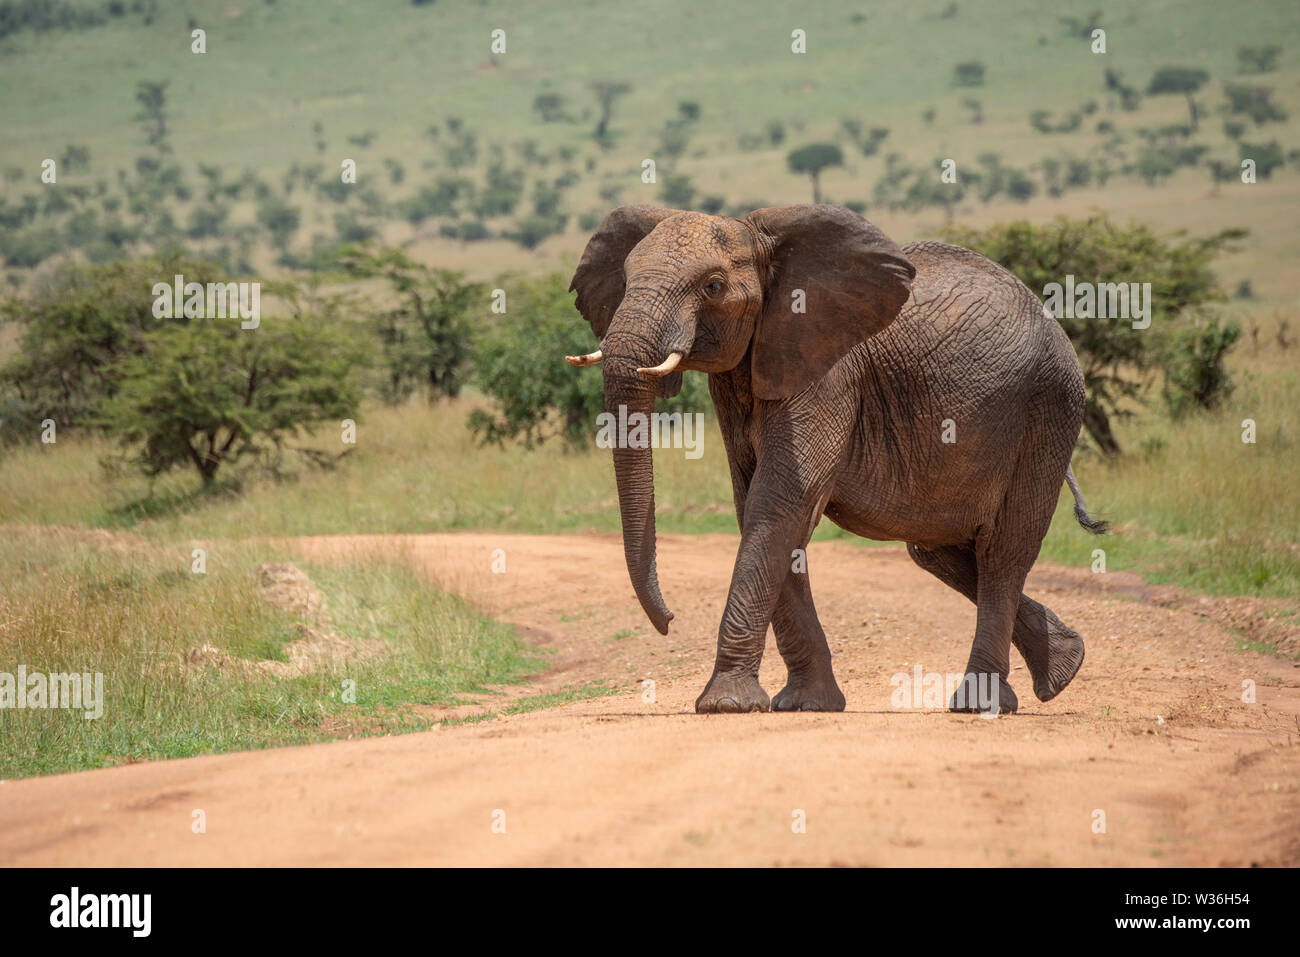 African elephant lifts head while crossing track Stock Photo